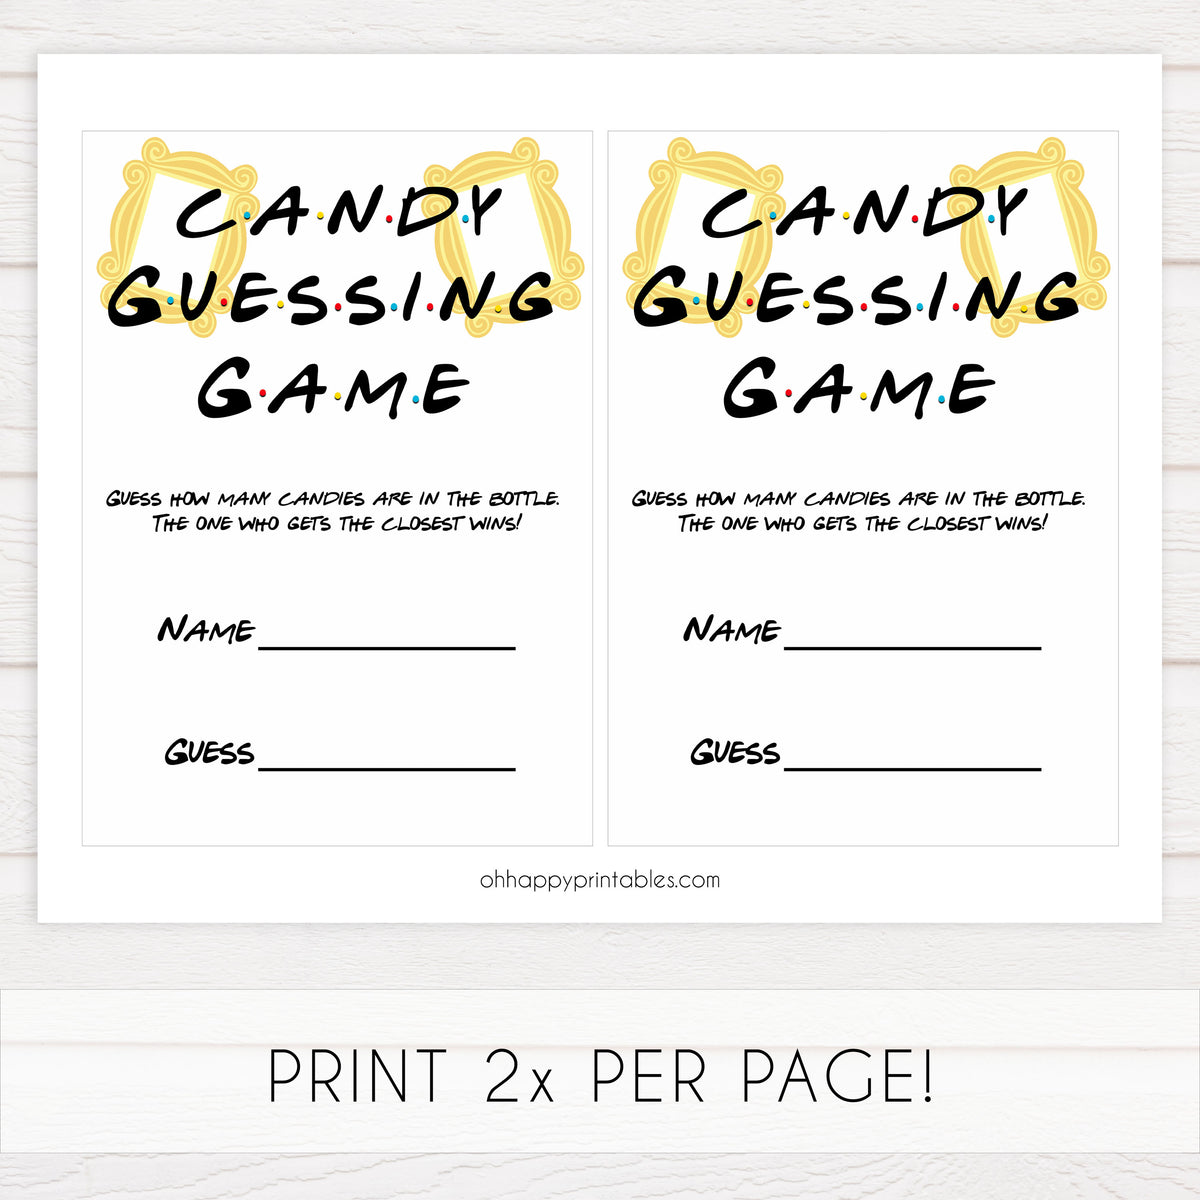 candy-guessing-game-friends-printable-baby-shower-games